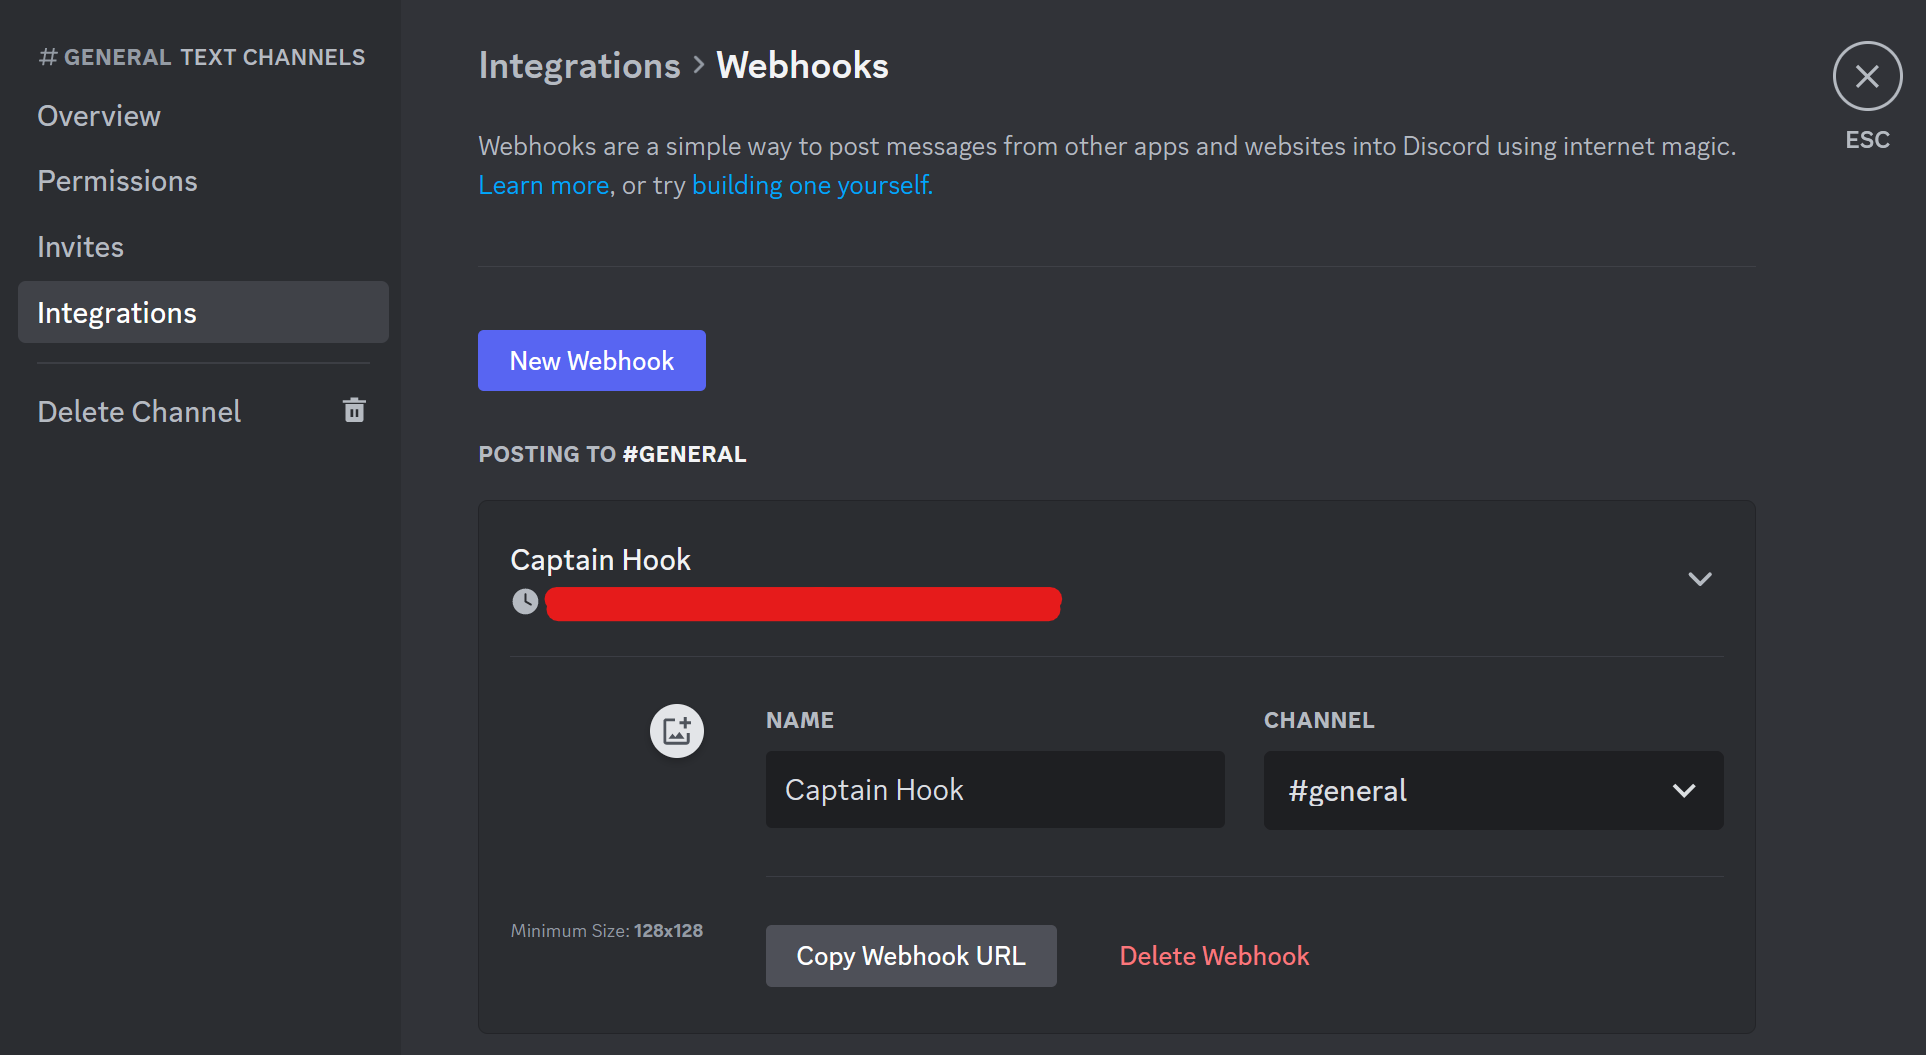 The webhook is created, and automatically labeled as "Captain Hook".